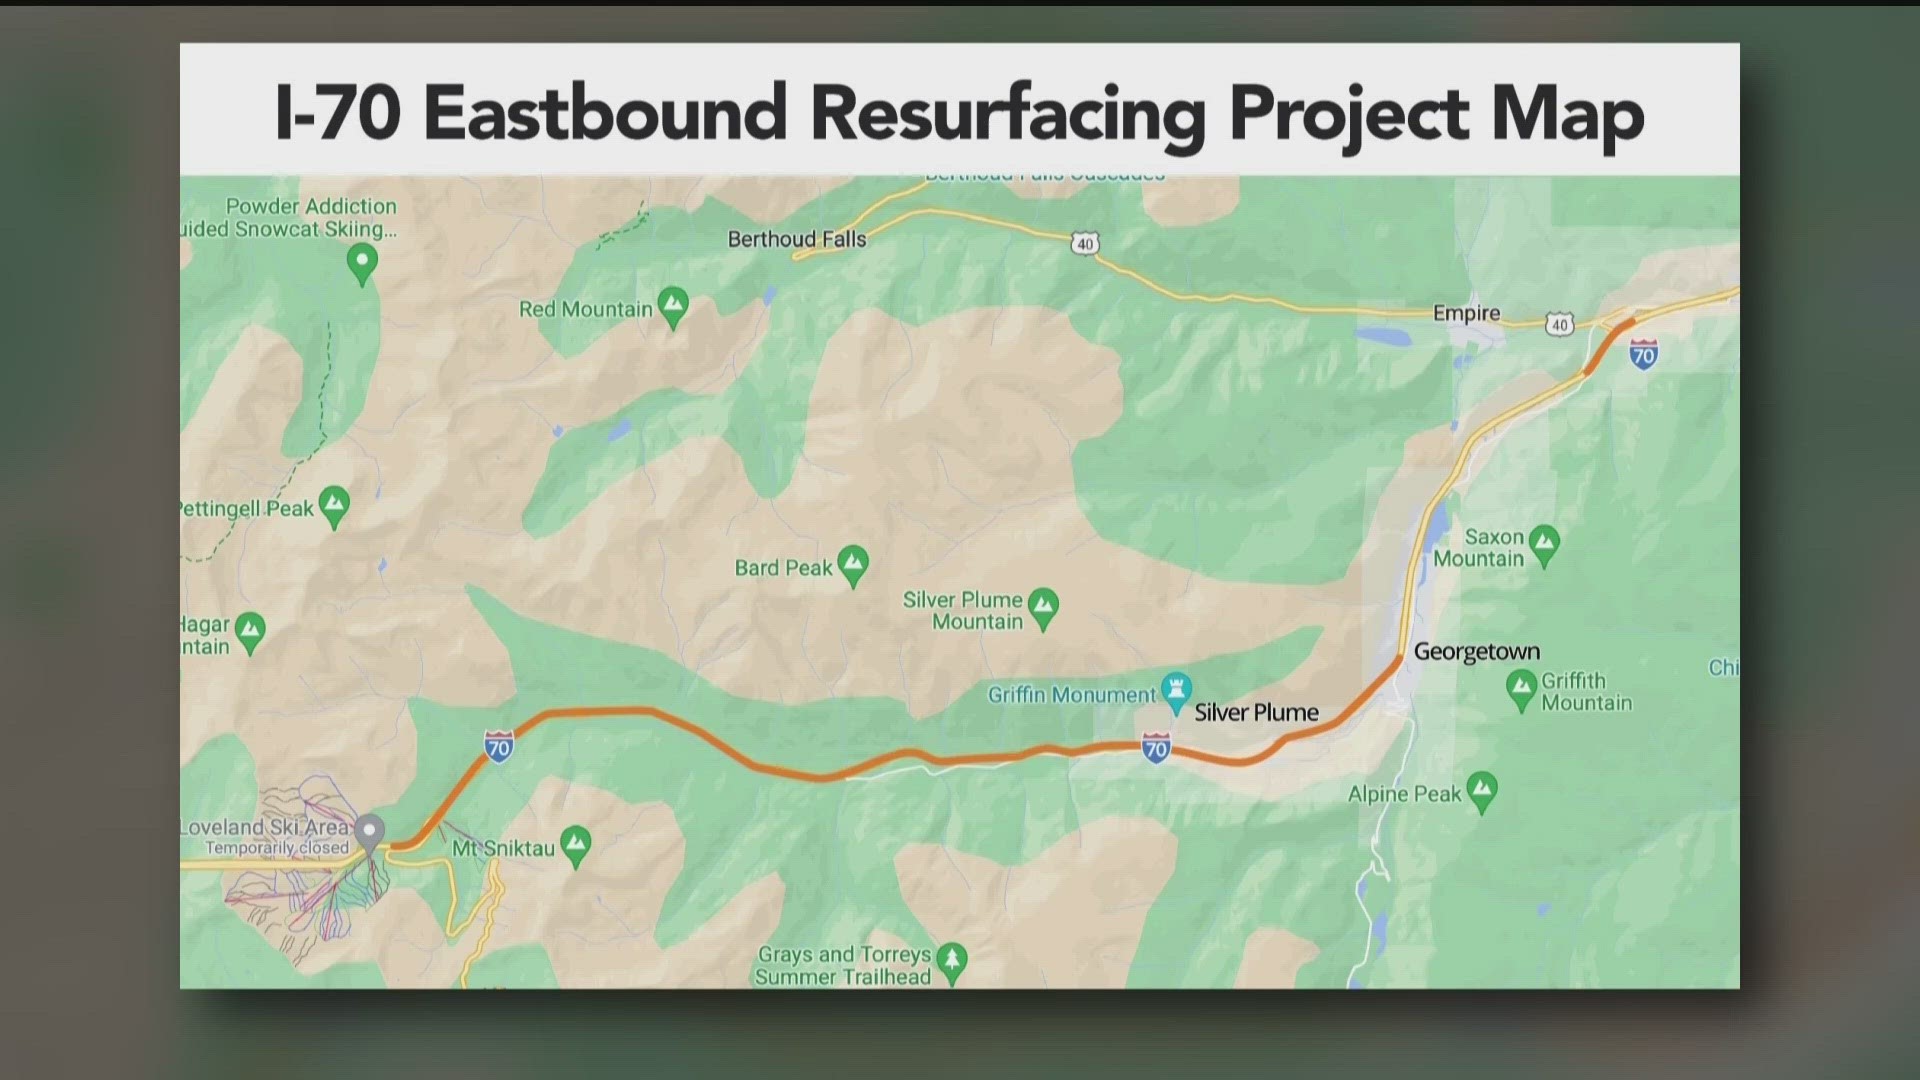 The project is scheduled to begin this week for a 13-mile stretch of eastbound I-70 between Eisenhower Tunnel and the Georgetown on-ramp.